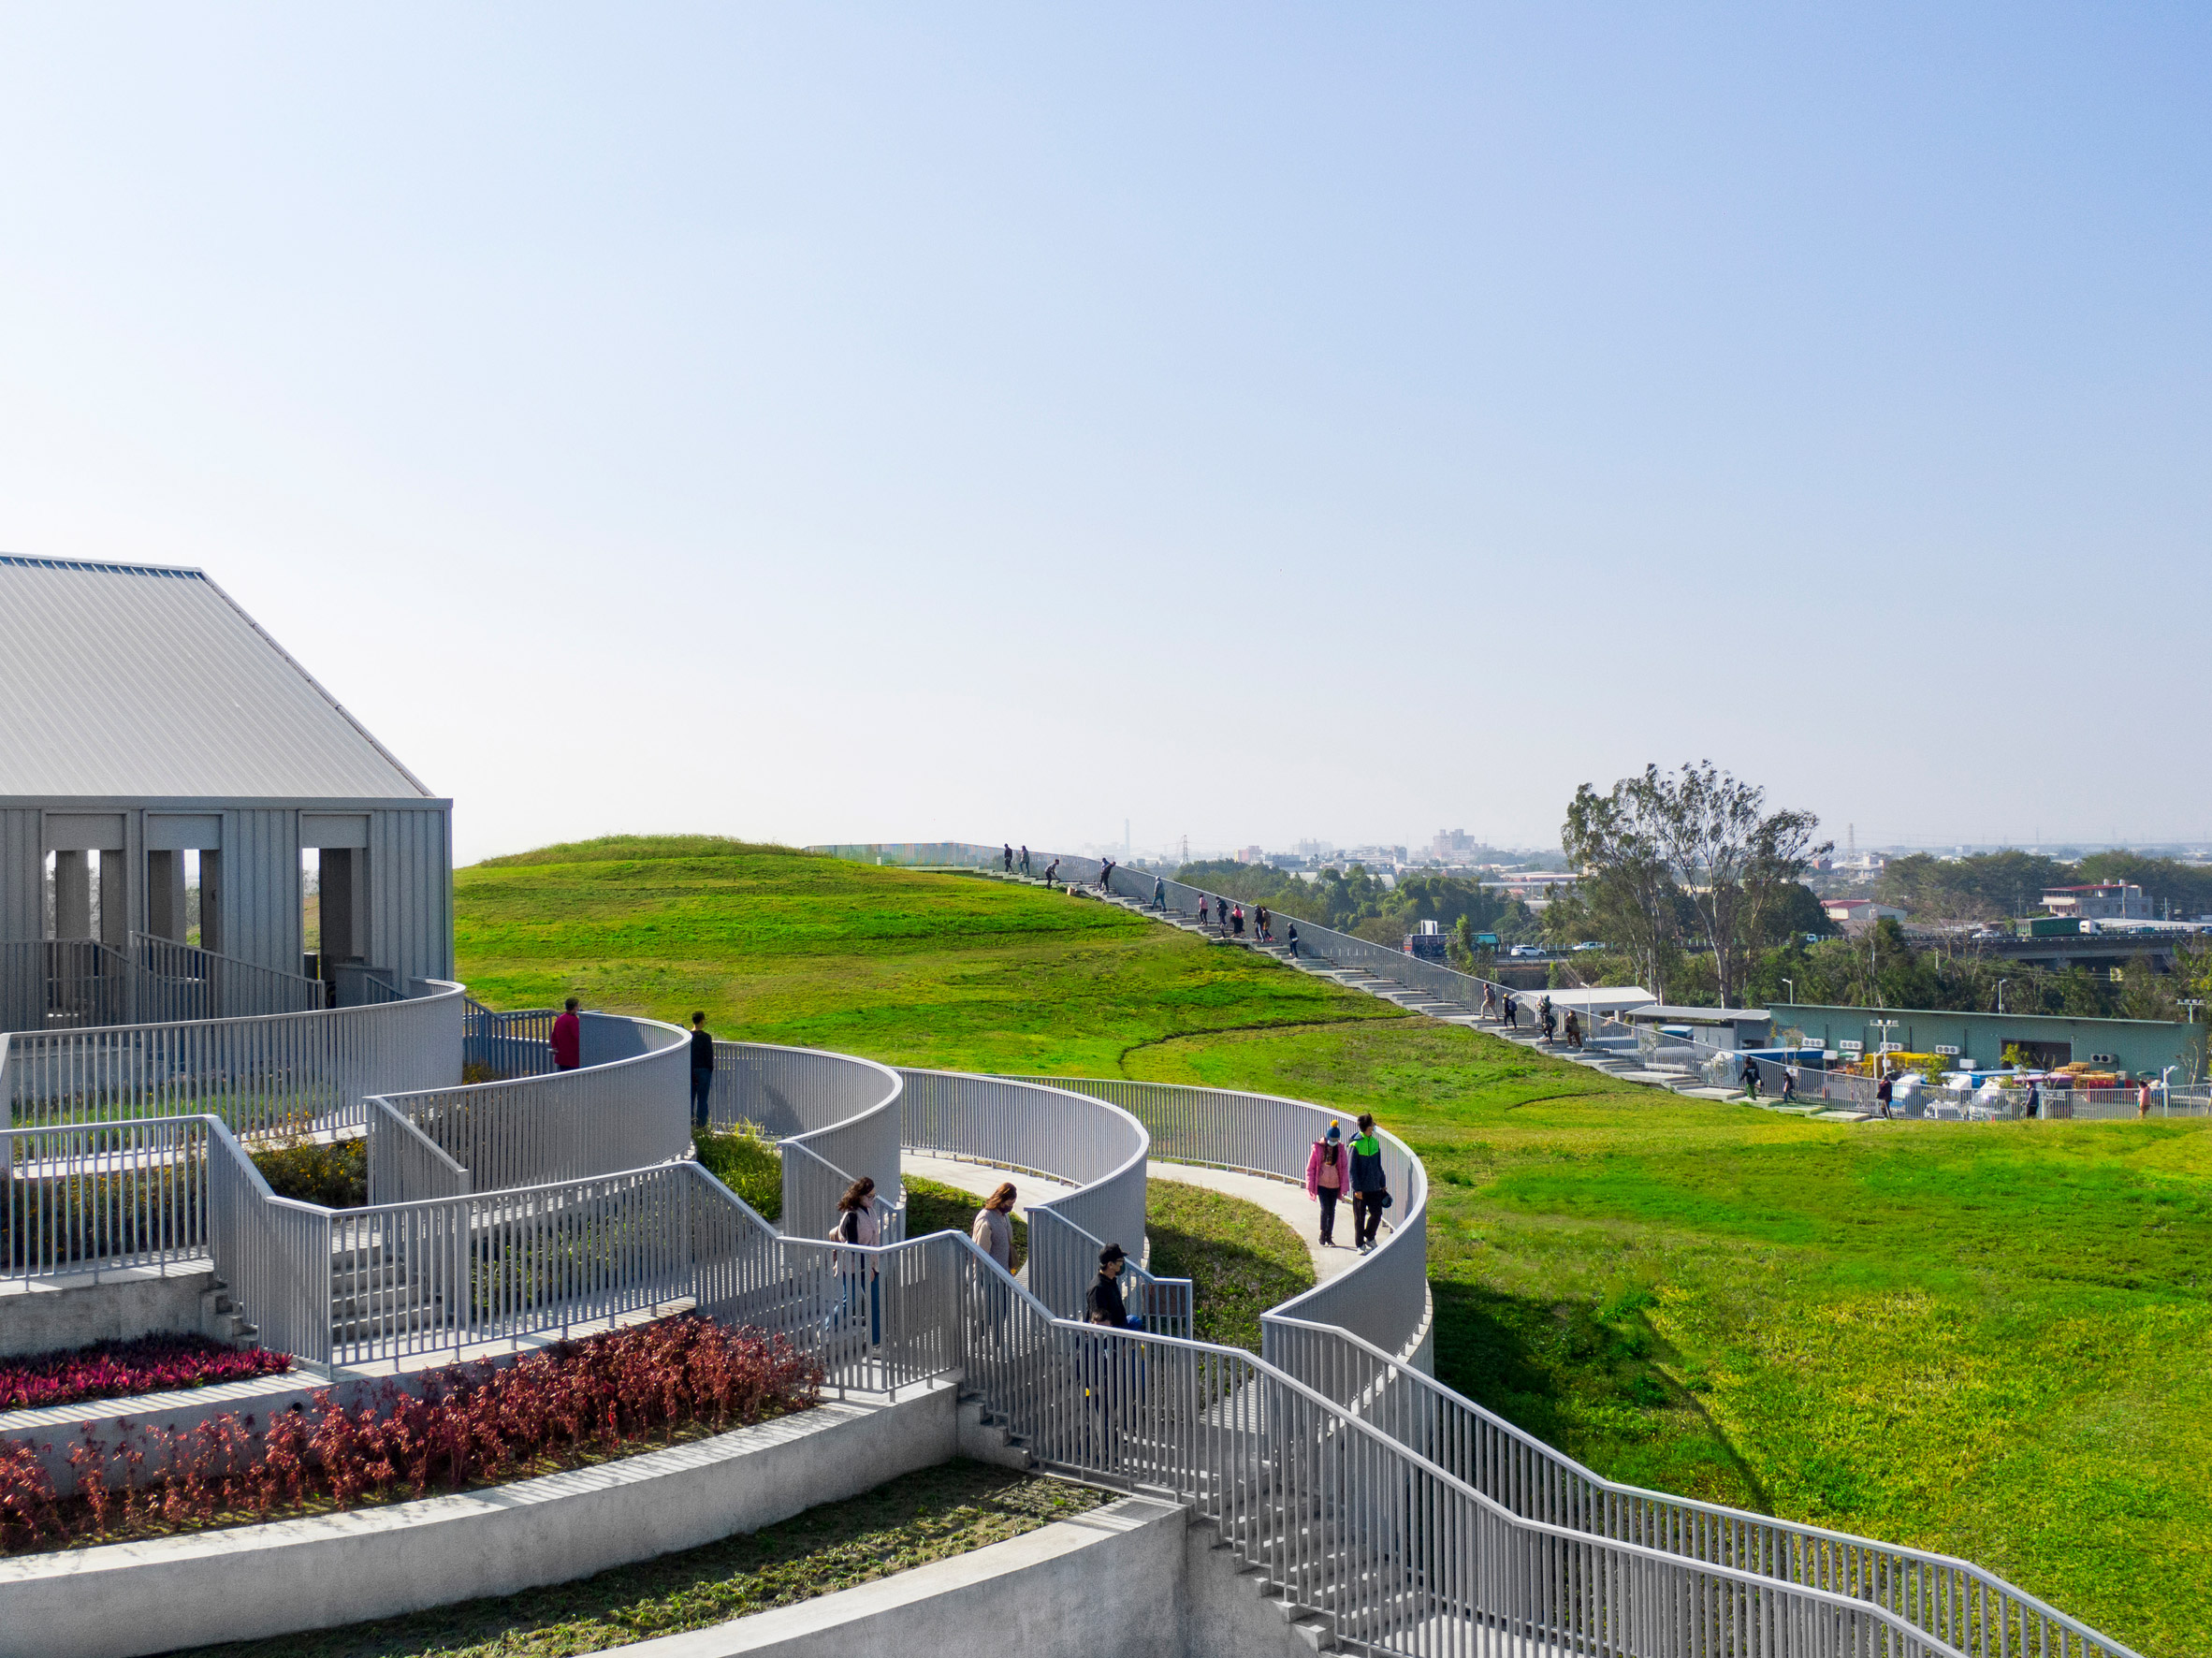 Stepped planted terraces surrounded by a grassy mound